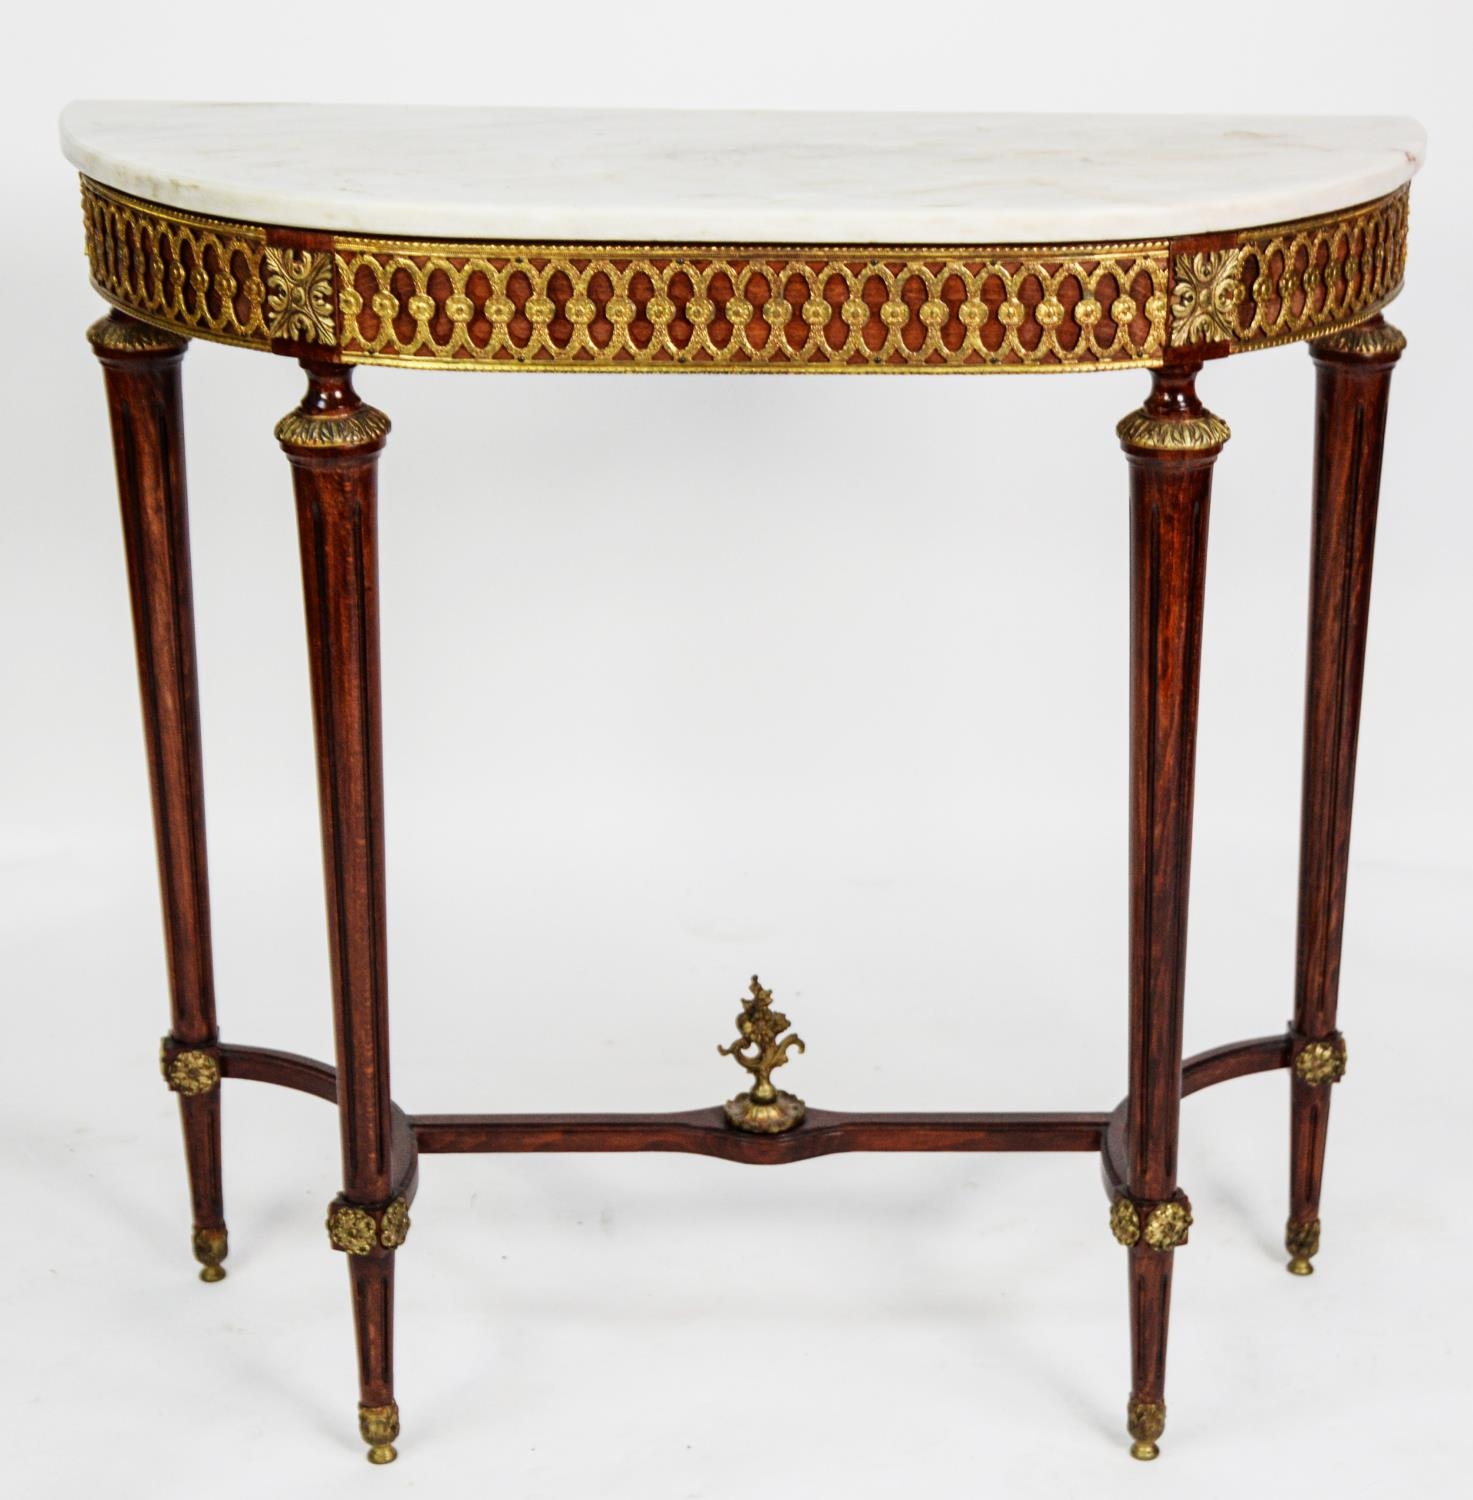 LOUIS XVI STYLE GILT METAL MOUNTED MAHOGANY SIDE TABLE WITH WHITE VEINED MARBLE TOP, the D shaped - Image 3 of 3